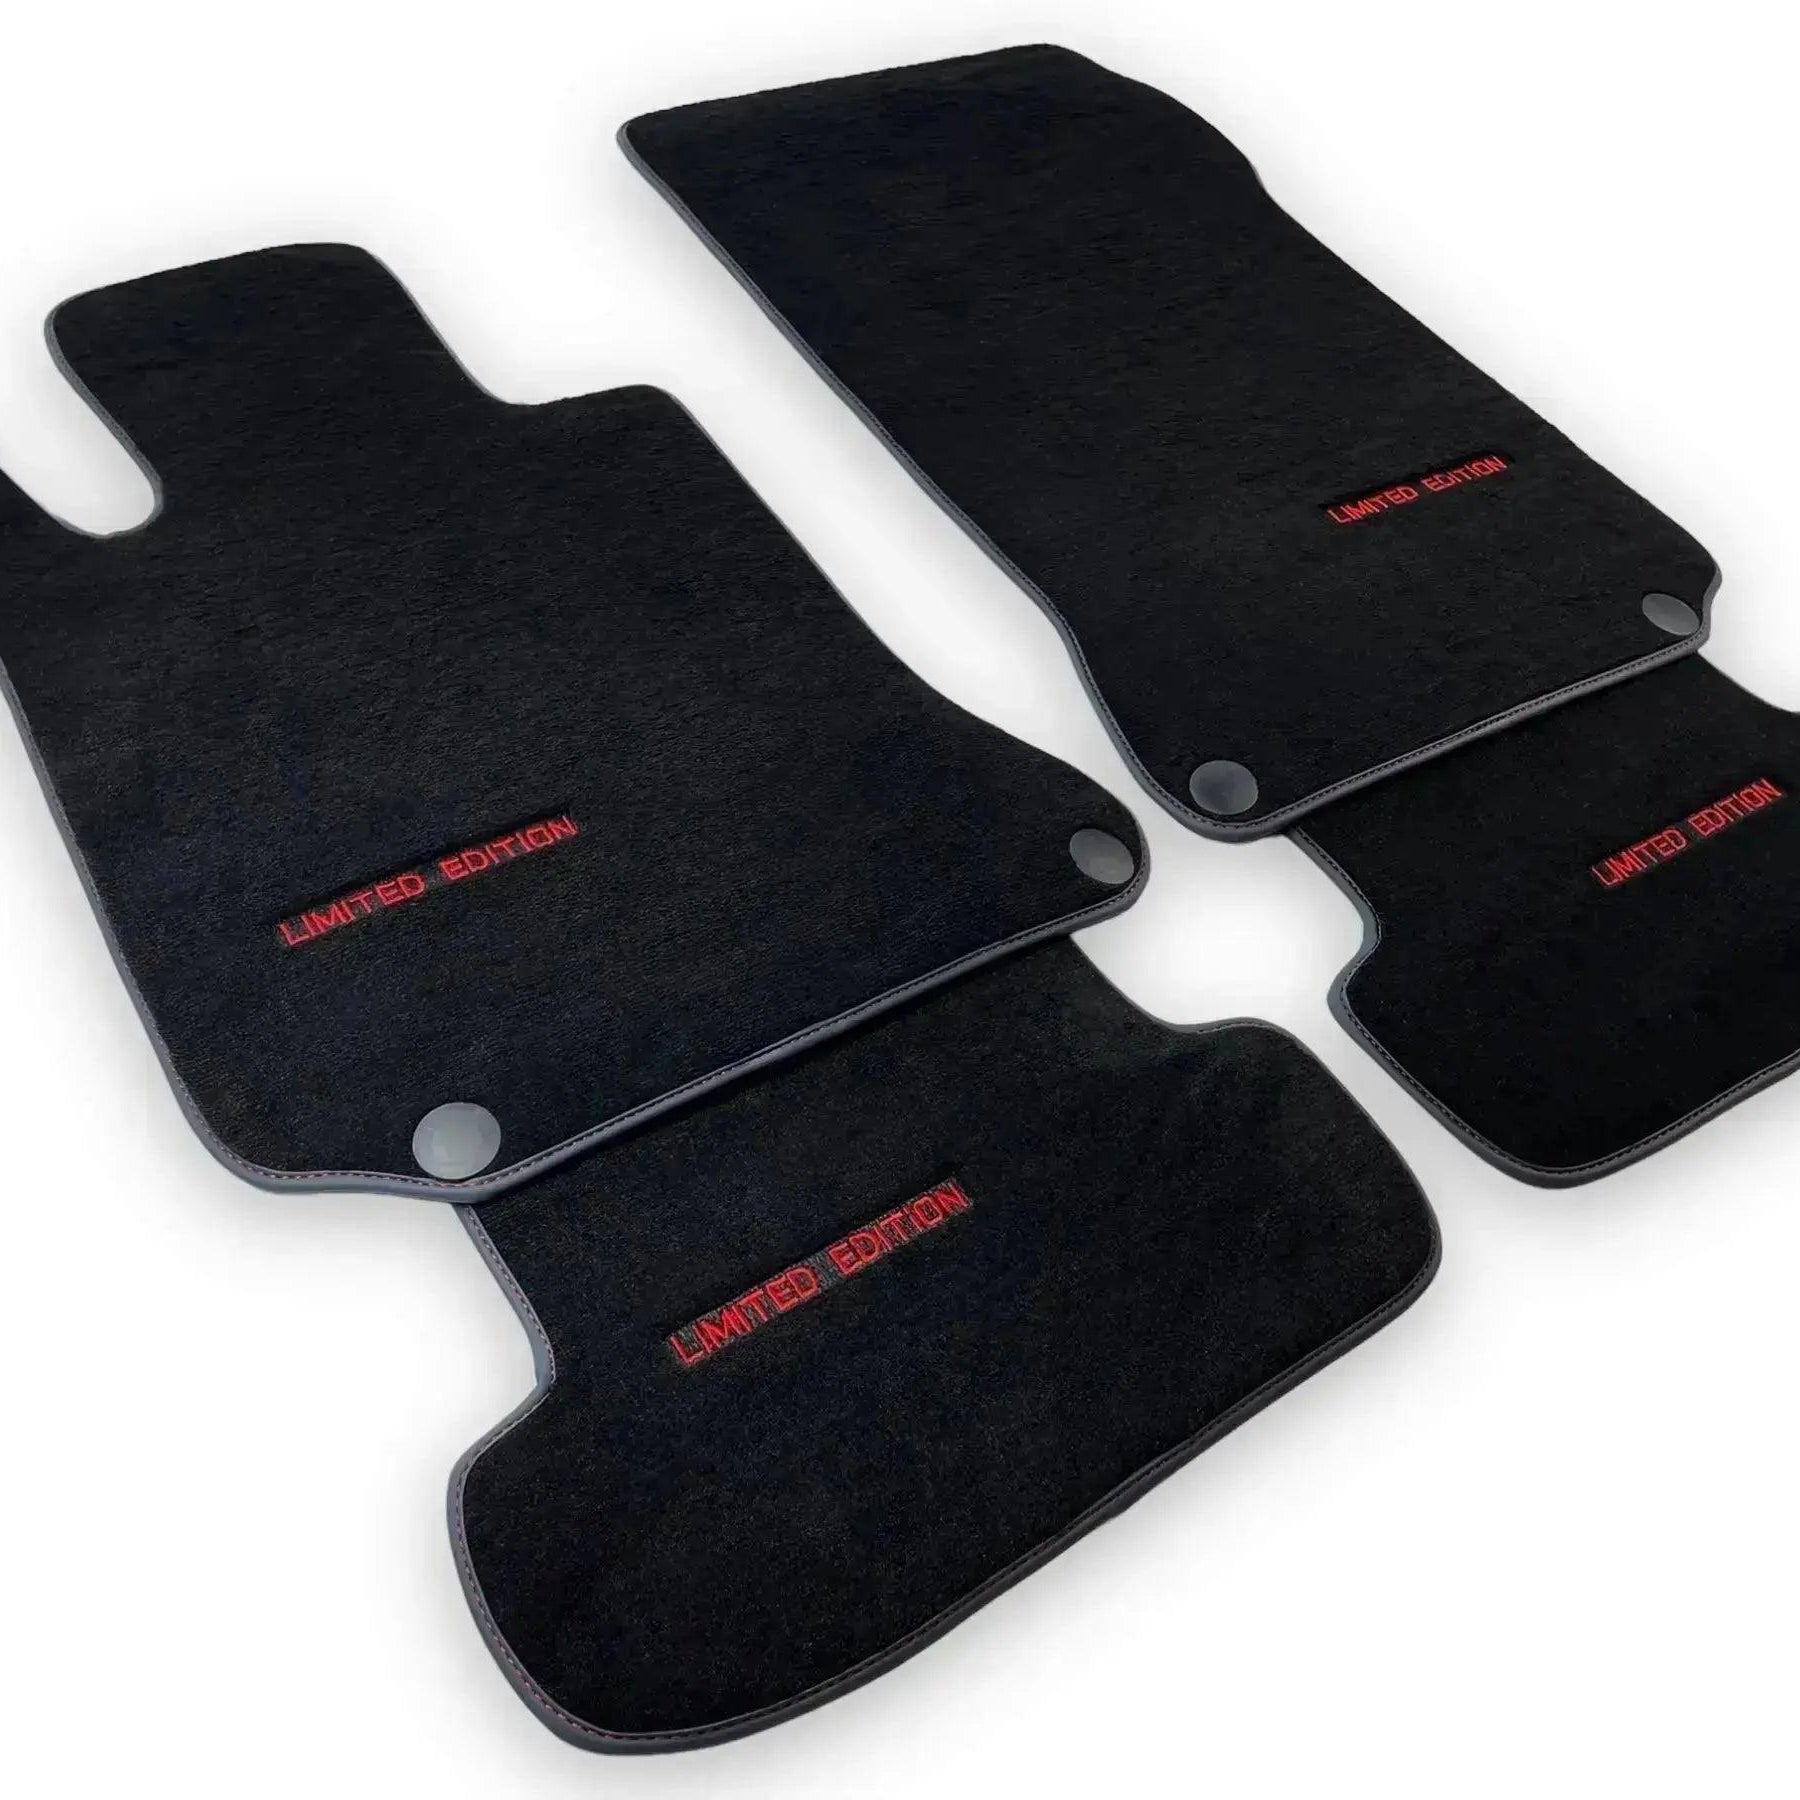 Black Floor Mats For Mercedes Benz S-Class X222 Maybach (2015-2021) | Limited Edition